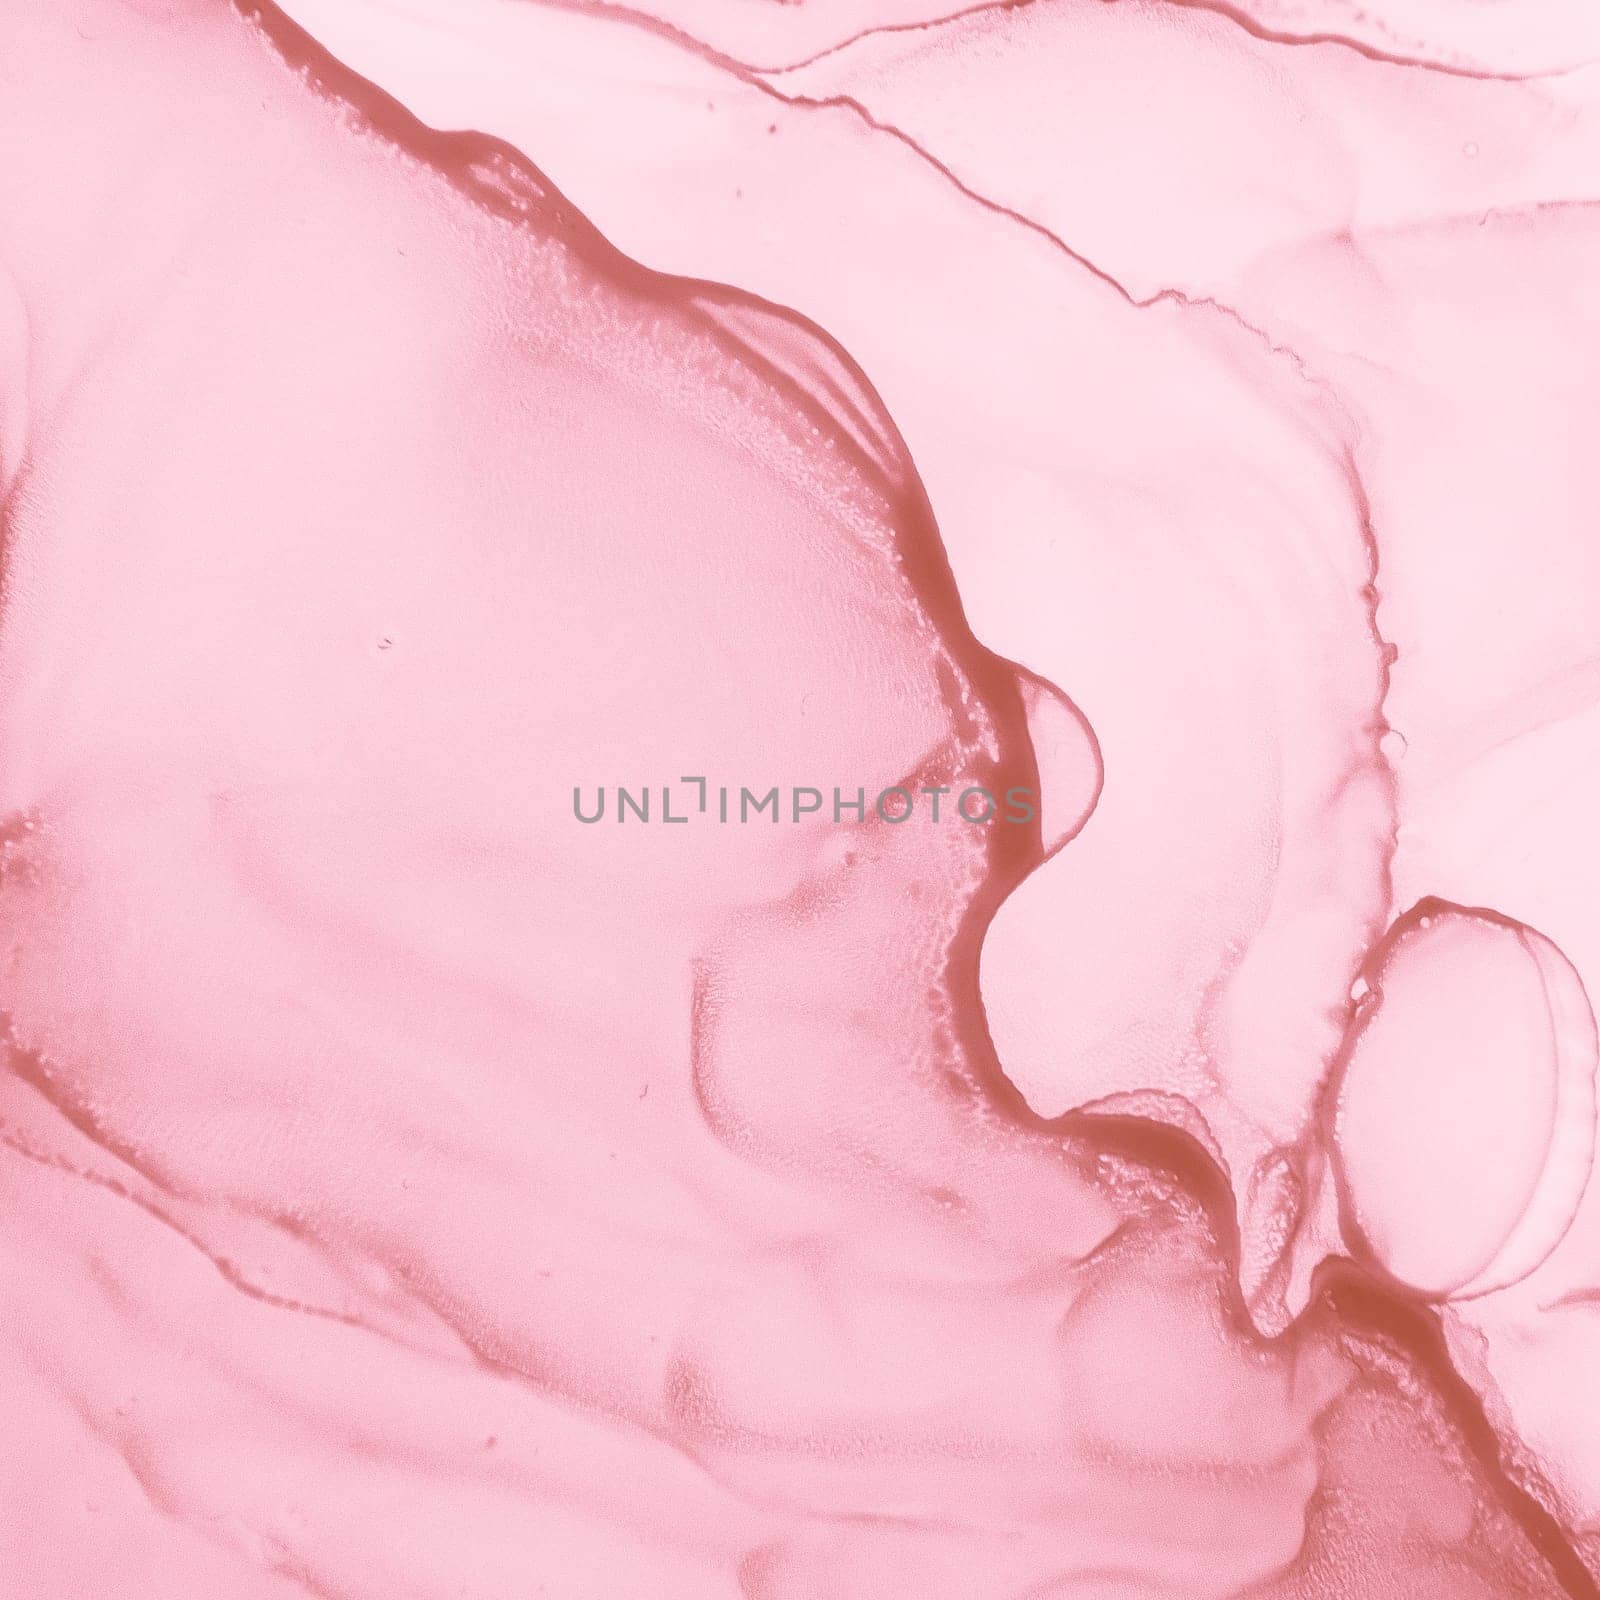 Elegant Pink Marble. Abstract Background. Ink Flow Pattern. Acrylic Paper. Feminine Fluid Painting. Alcohol Liquid Marble. Rose Mix. Art Creative Effect. Contemporary Luxury Marble.